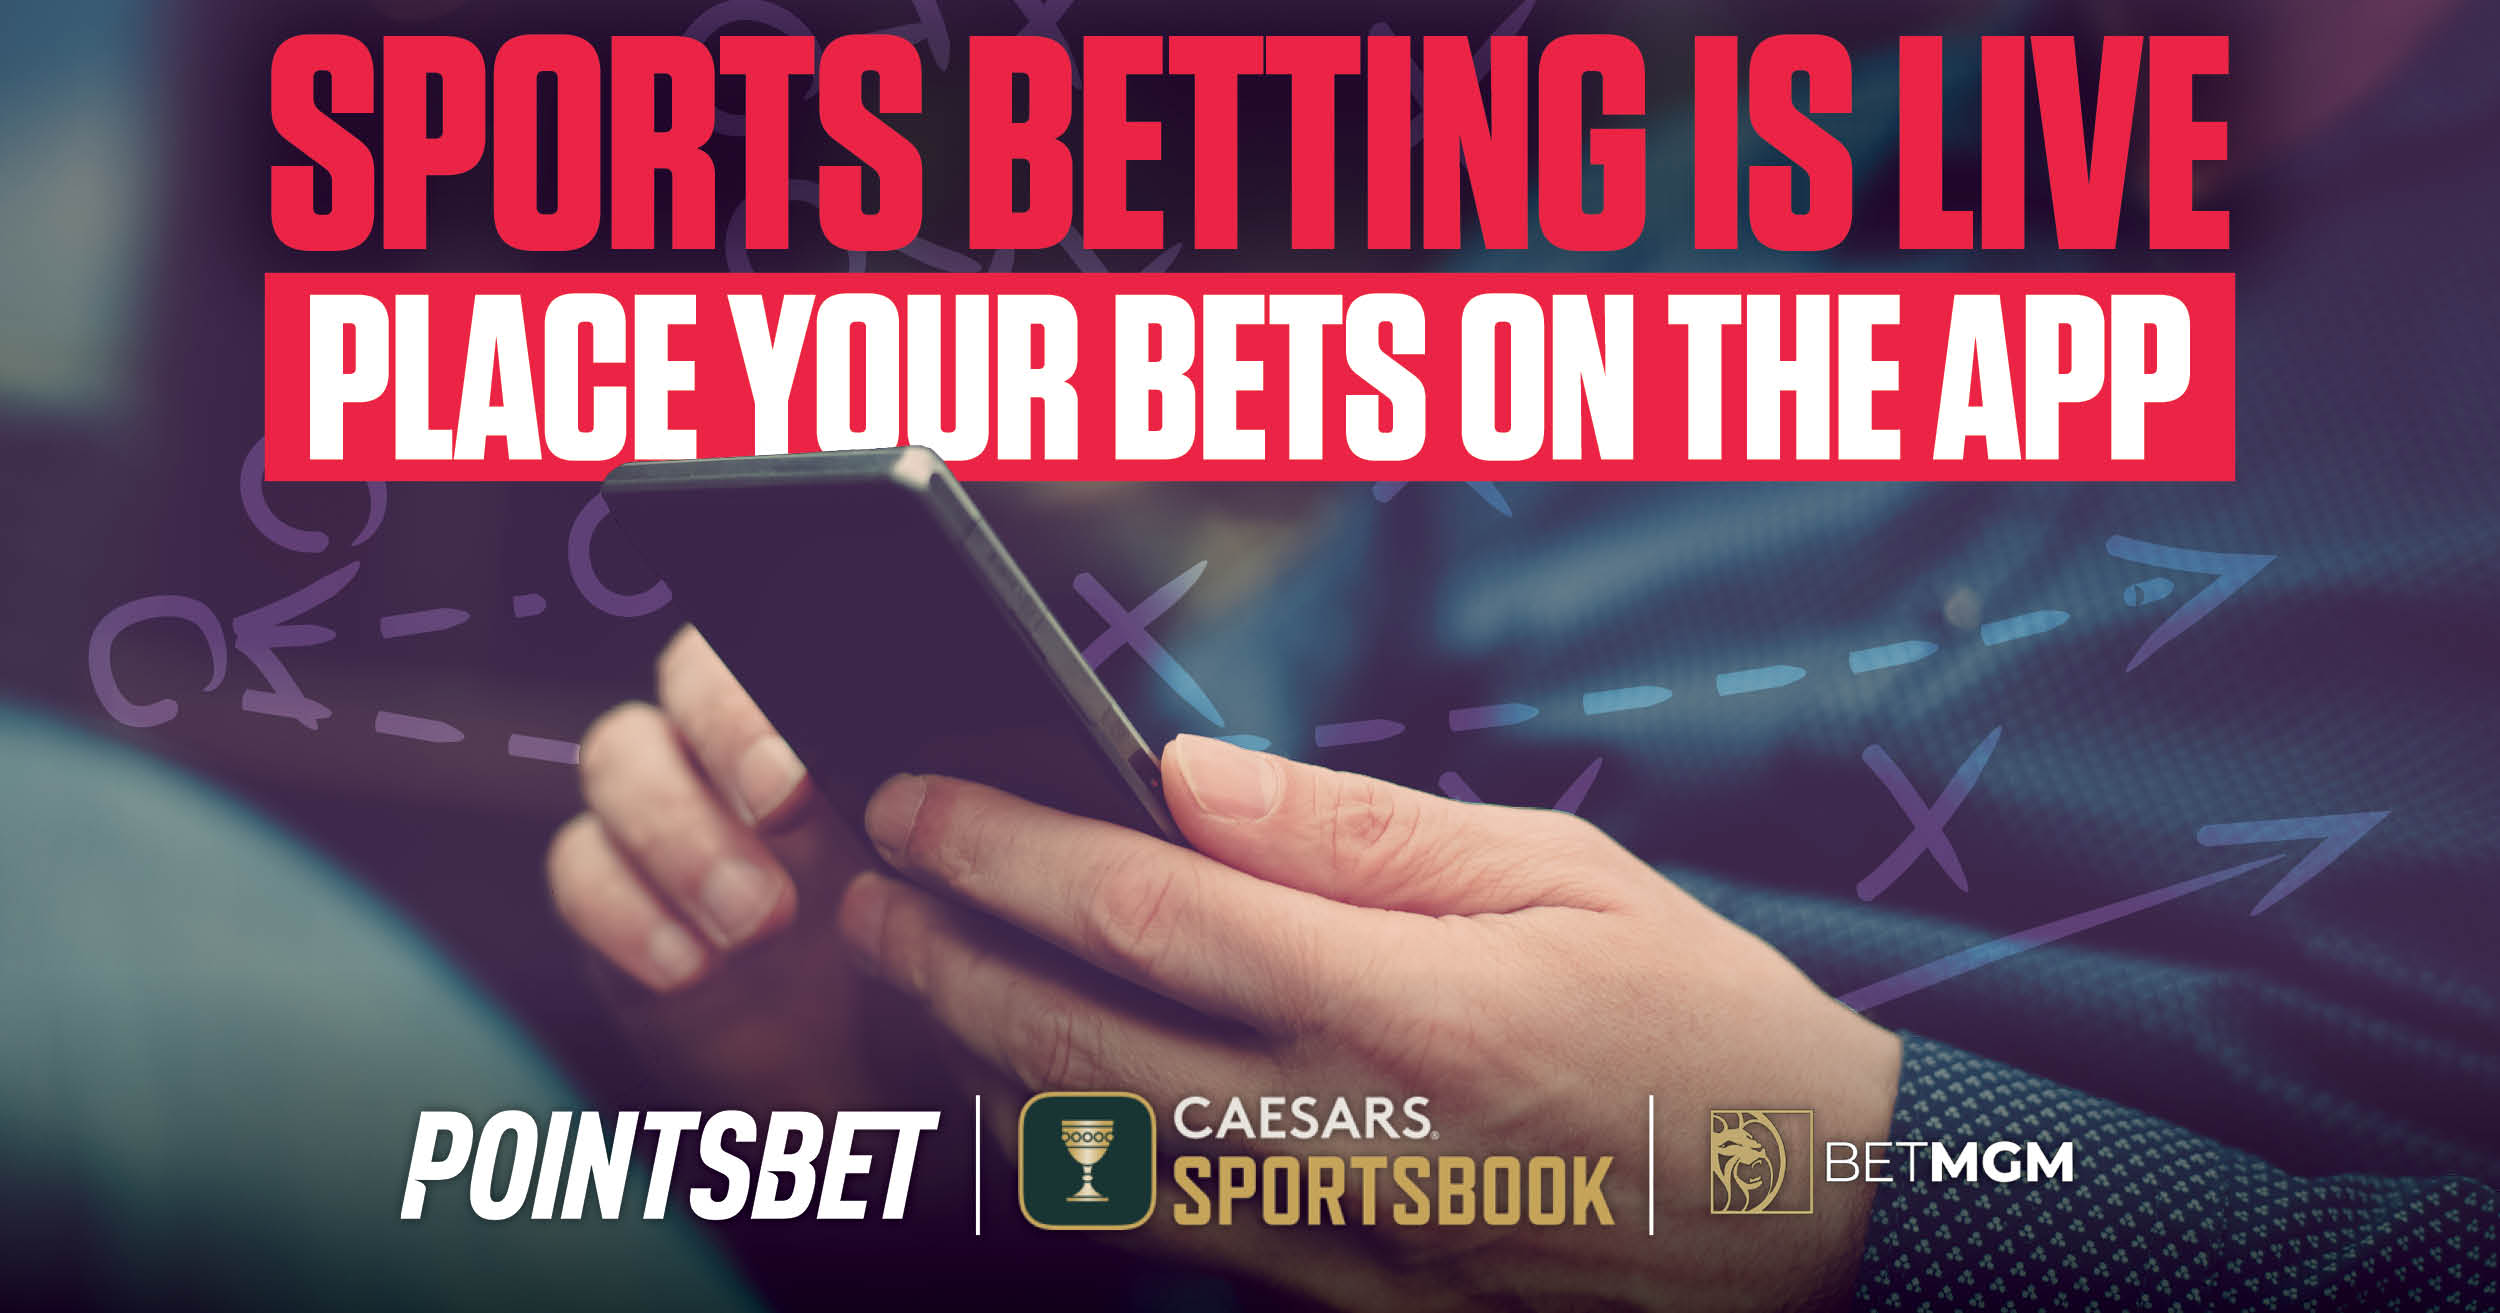 Sports Betting is Live Place your bets on the app